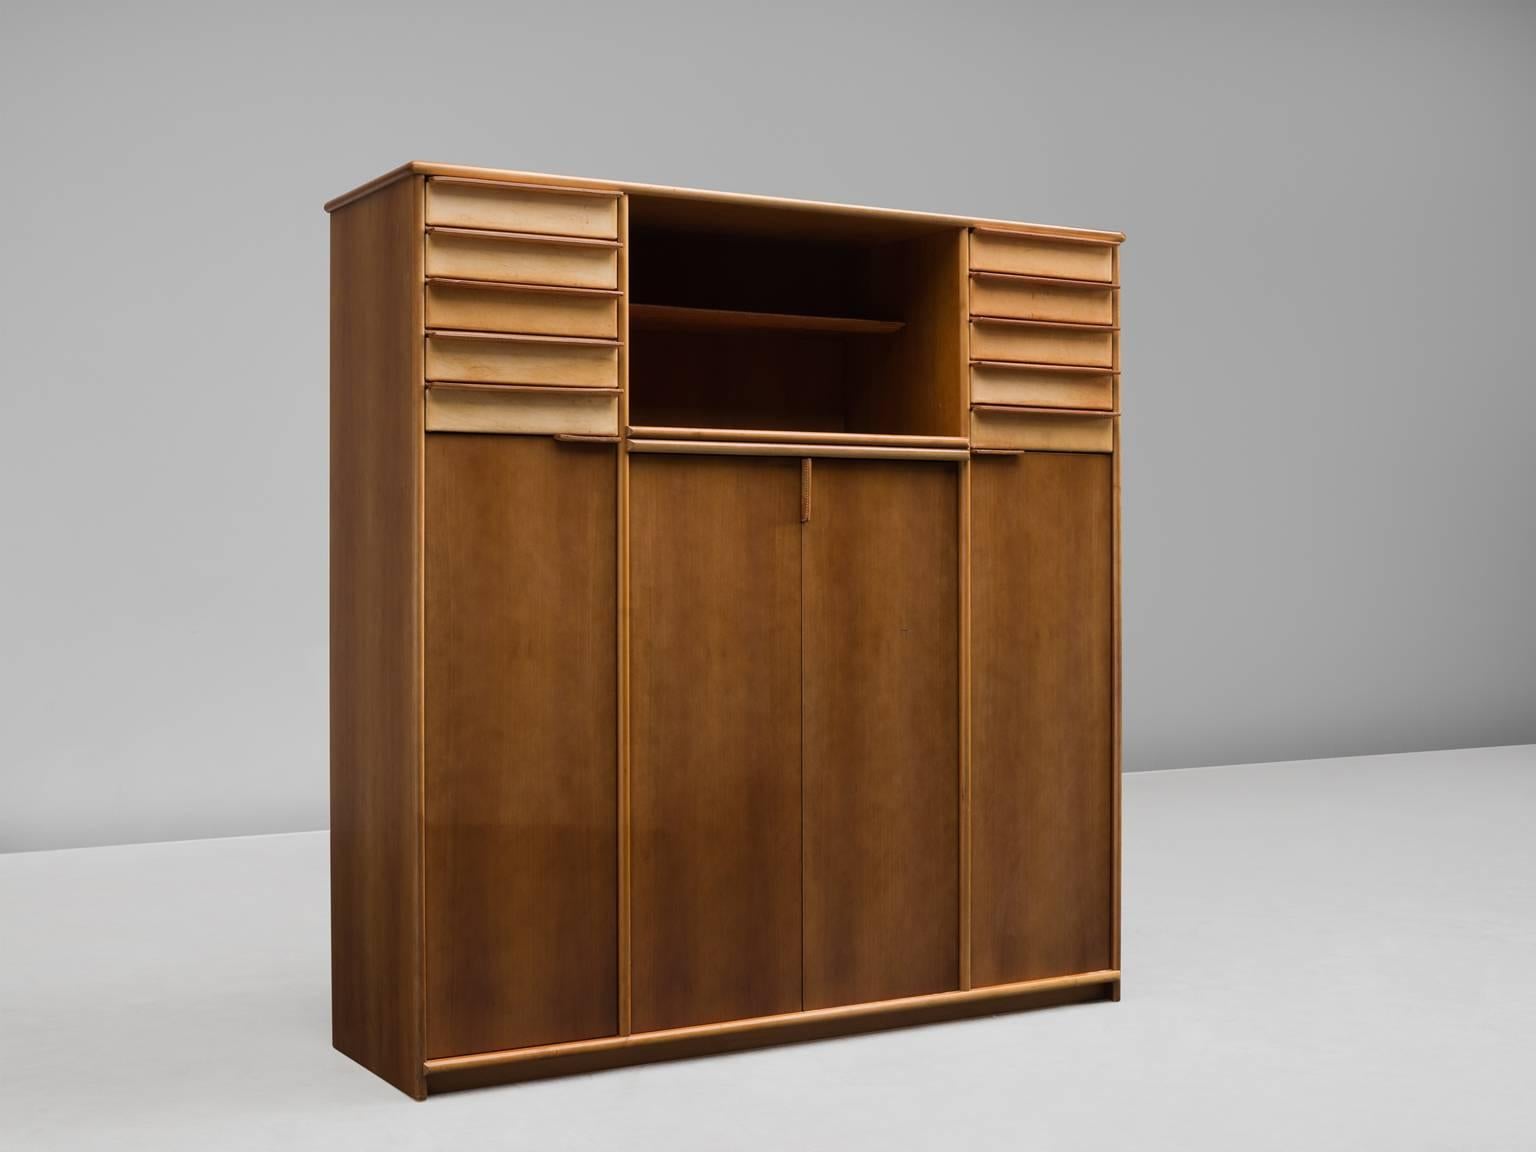 Cabinet, leather, walnut, Italy, 1950s.

This extremely well-executed cabinet is made out of walnut and cognac leather. It It features four doors, three shelves and fives drawers on each side of the cabinet. In the middle between the two units of